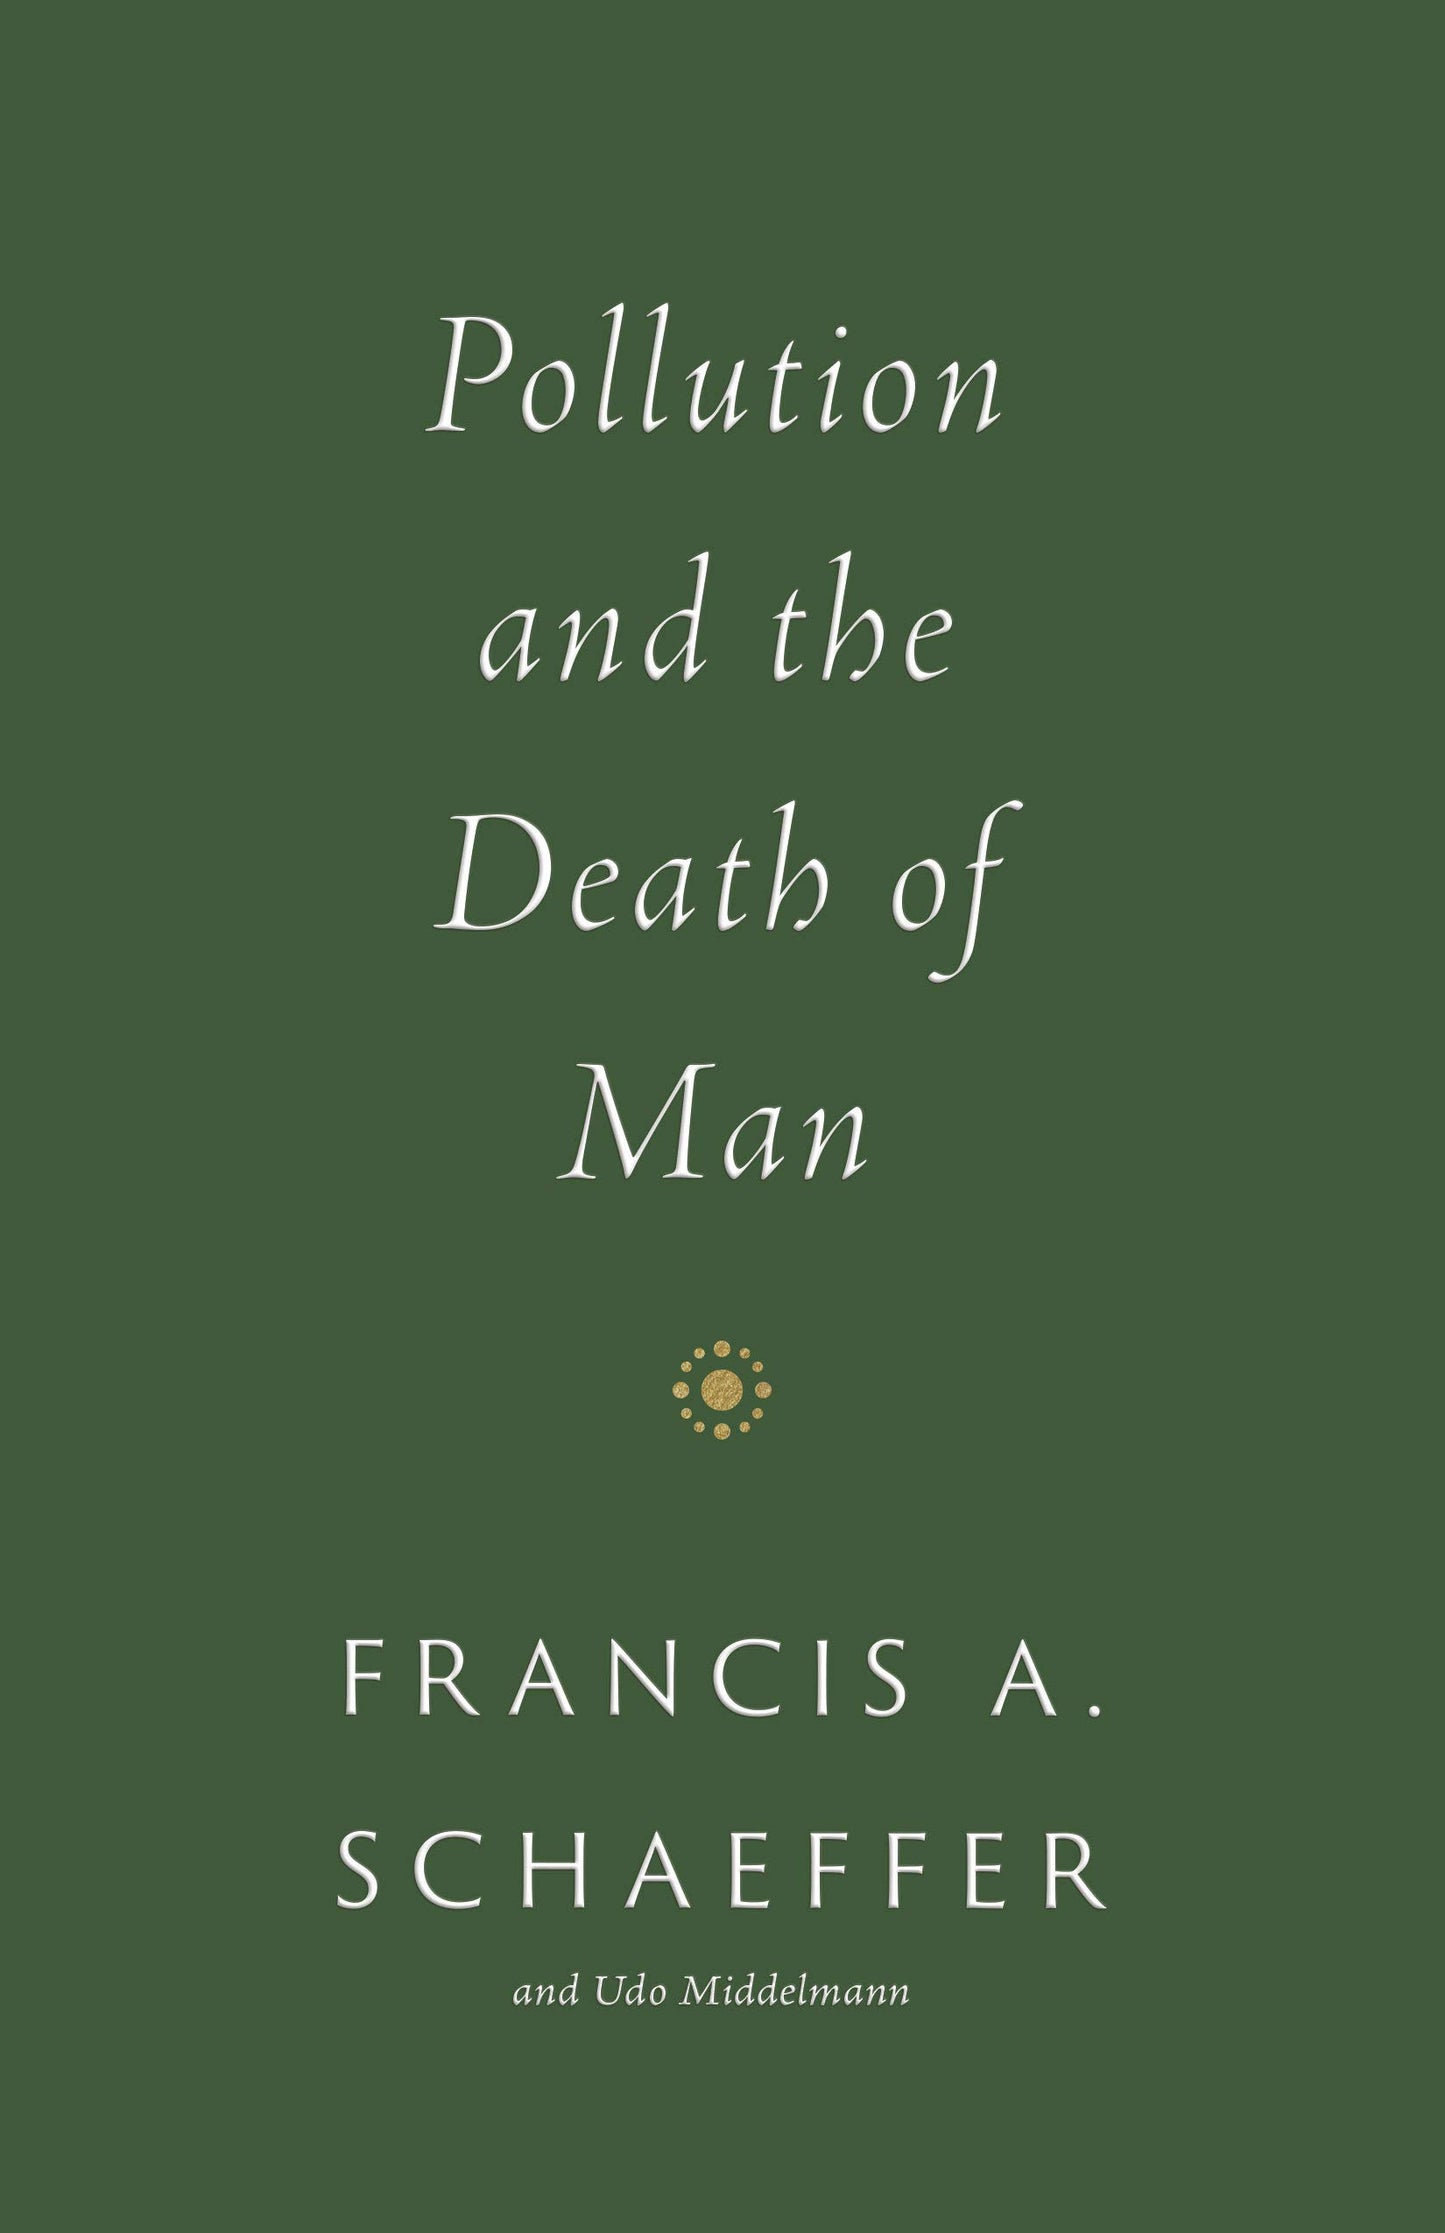 Pollution and the Death of Man (Schaeffer)